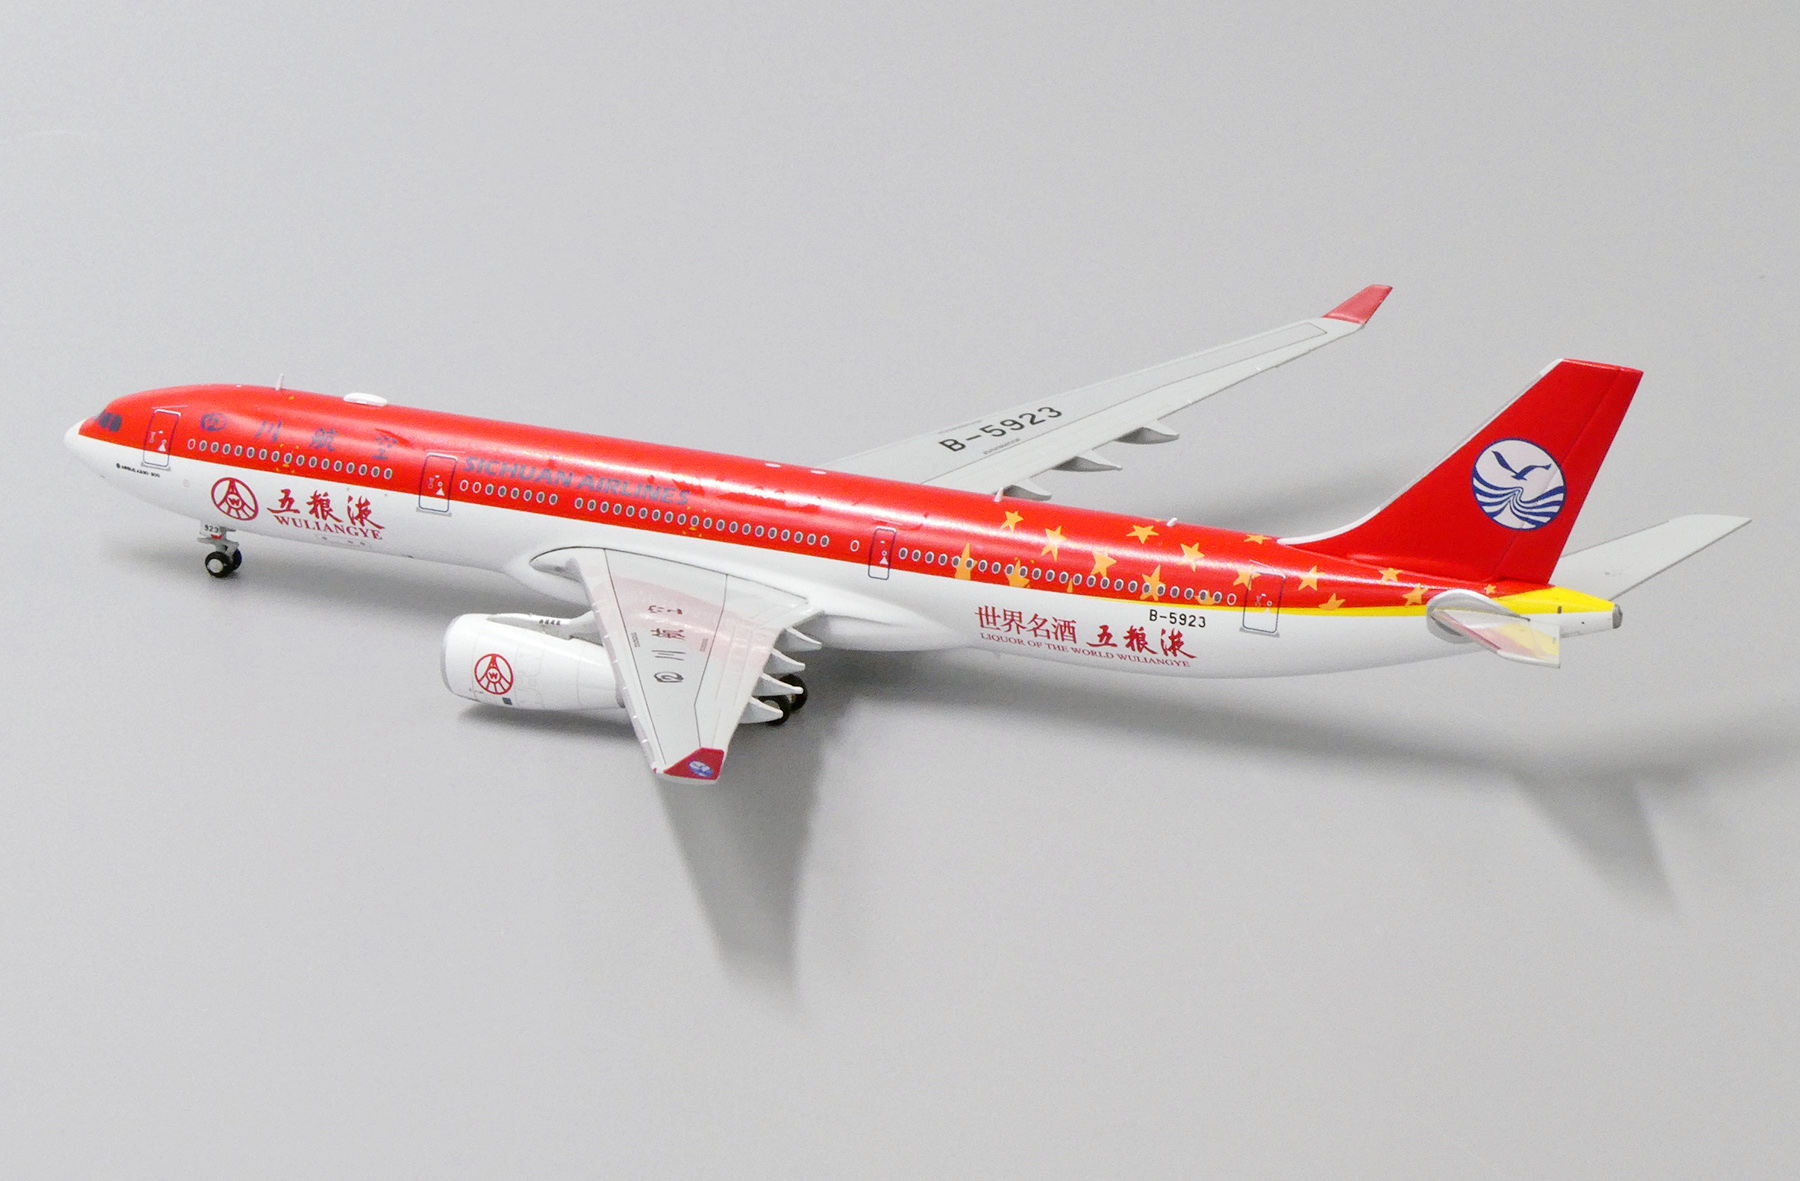 Details about   JC Wings SICHUAN AIRLINES AIRBUS A330-200F B-308Q 1/400 diecast plane model 